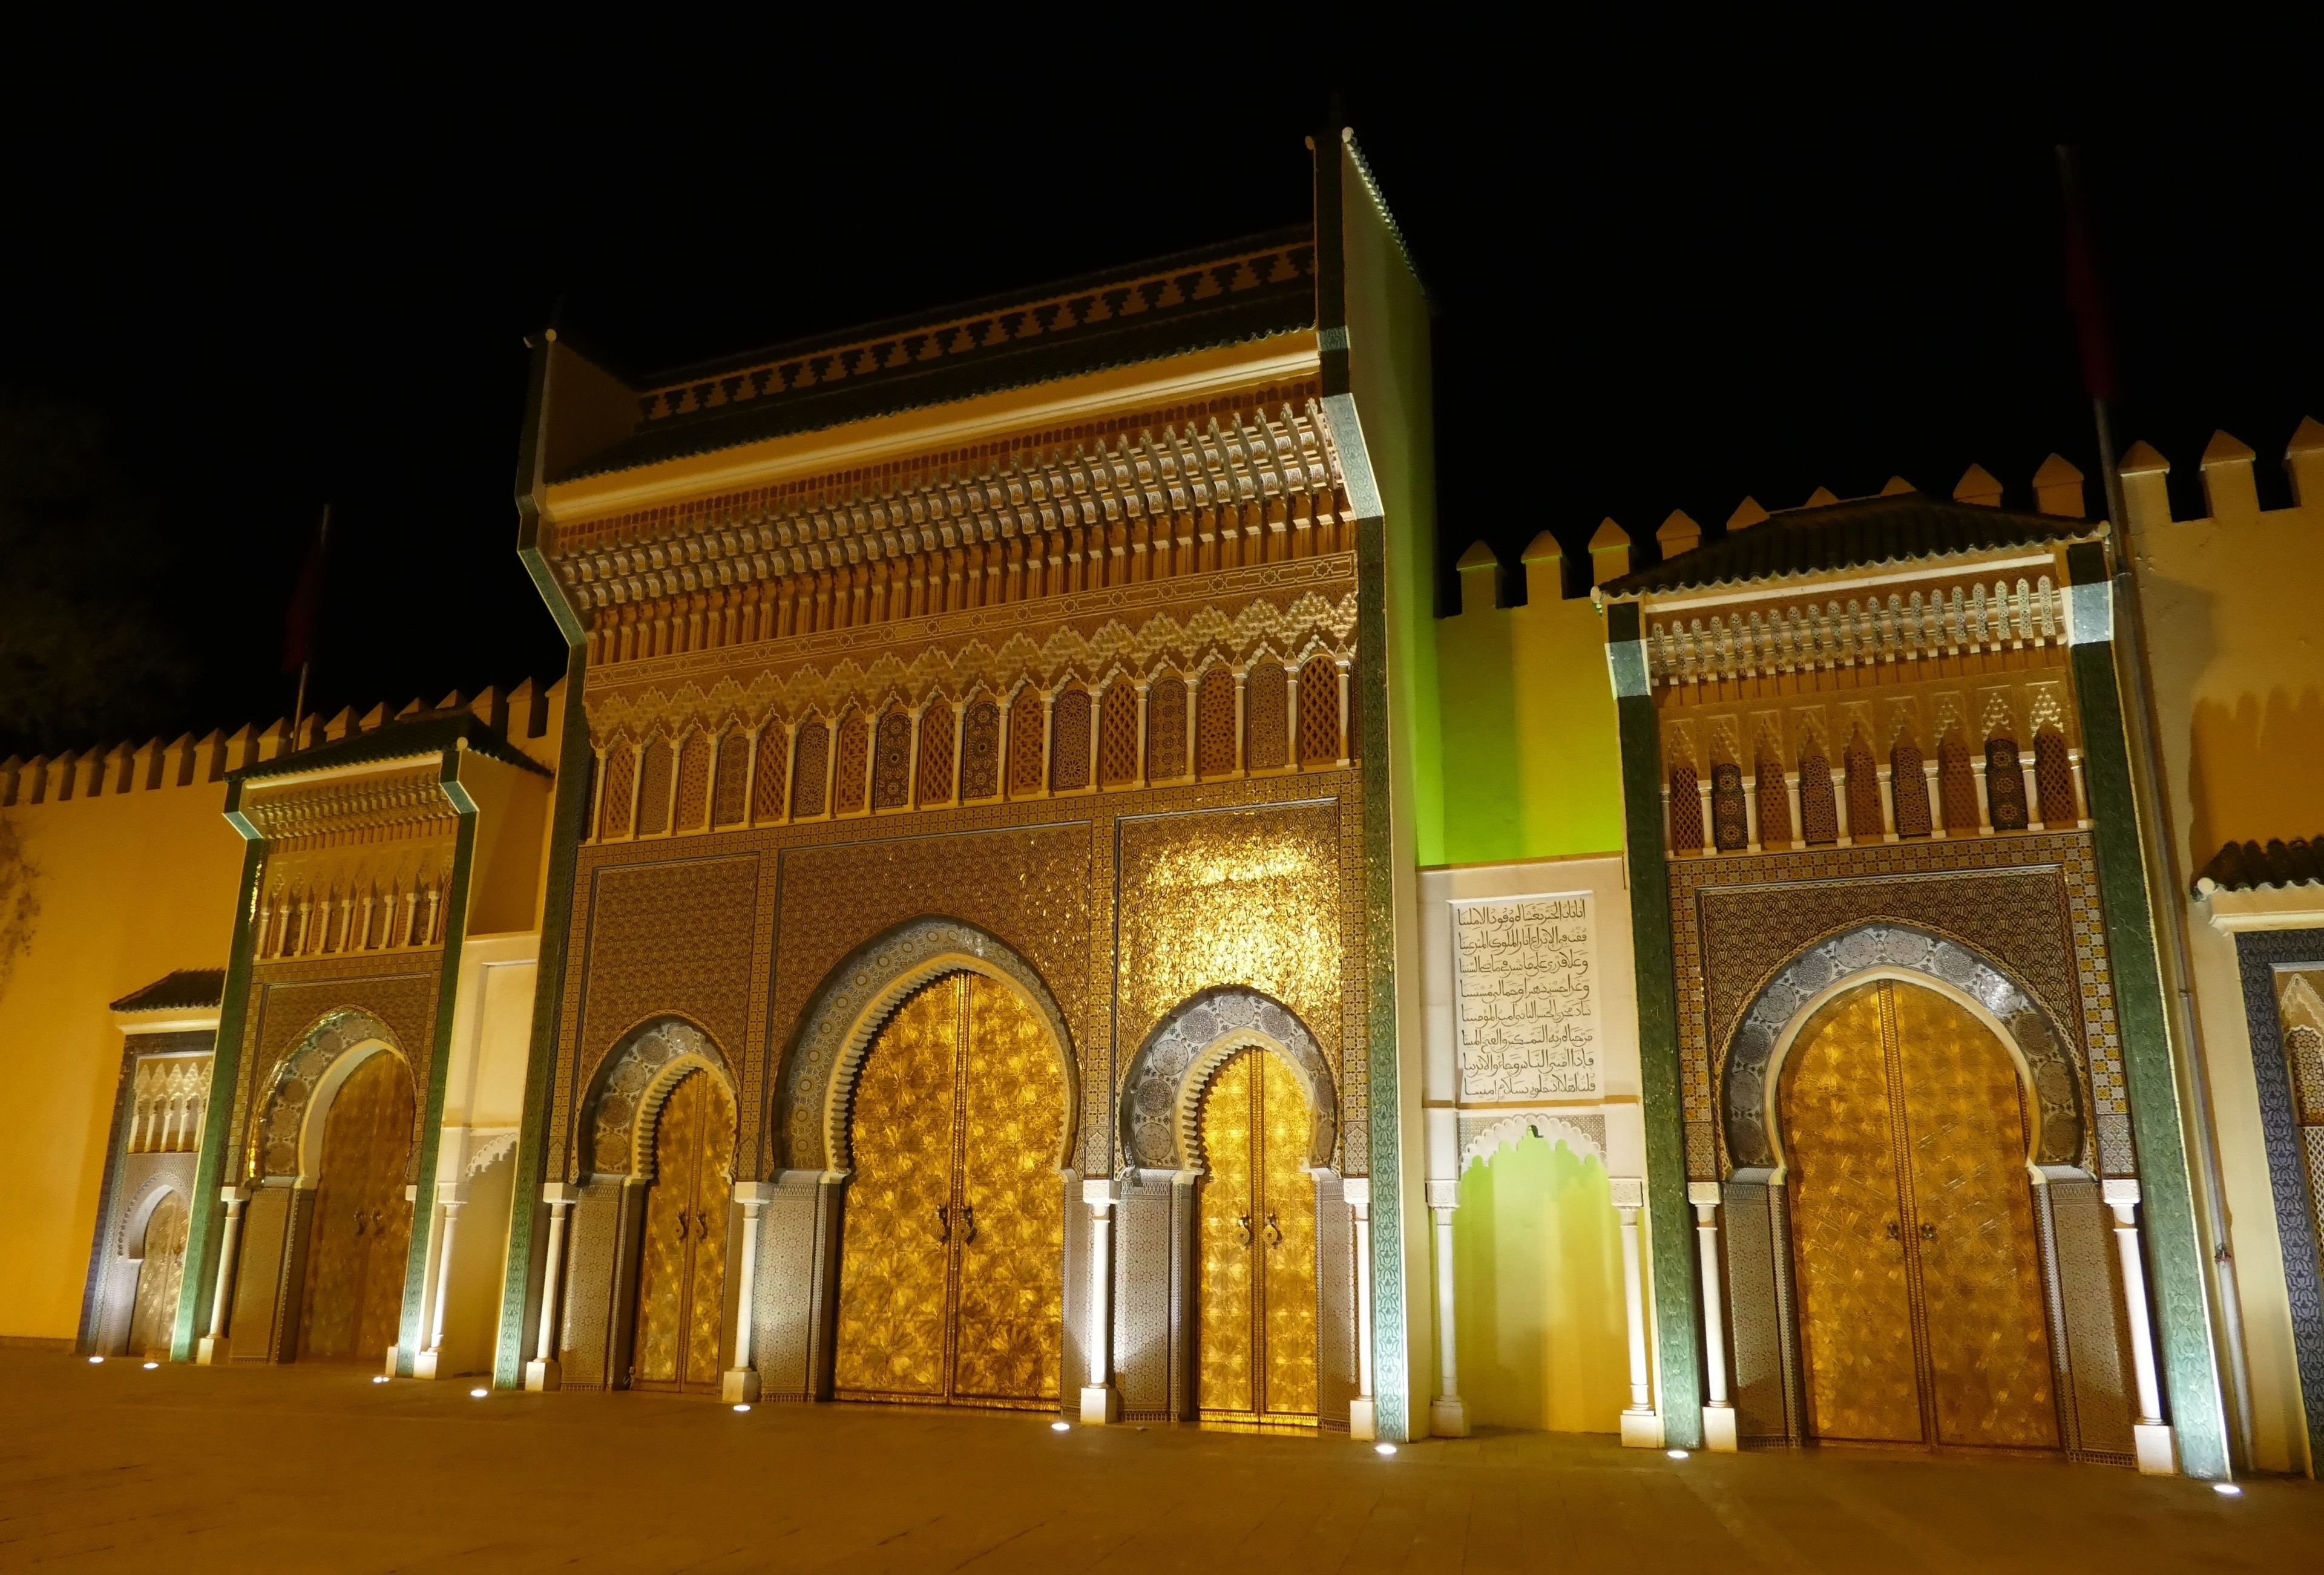 The seven gates at night.